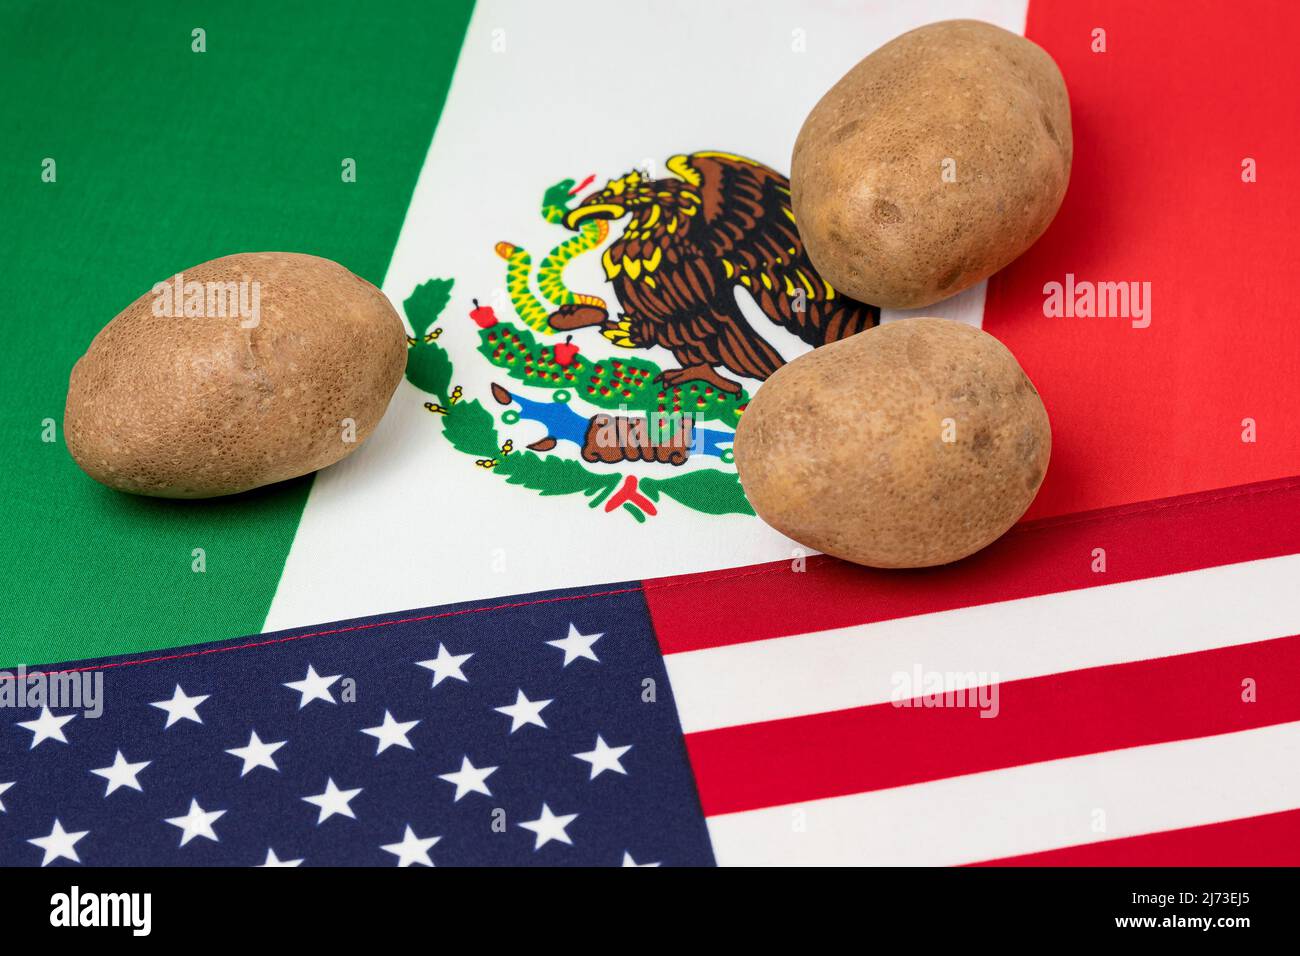 Potatoes with United States of America and Mexico flags. Potato farming trade, imports and exports concept. Stock Photo